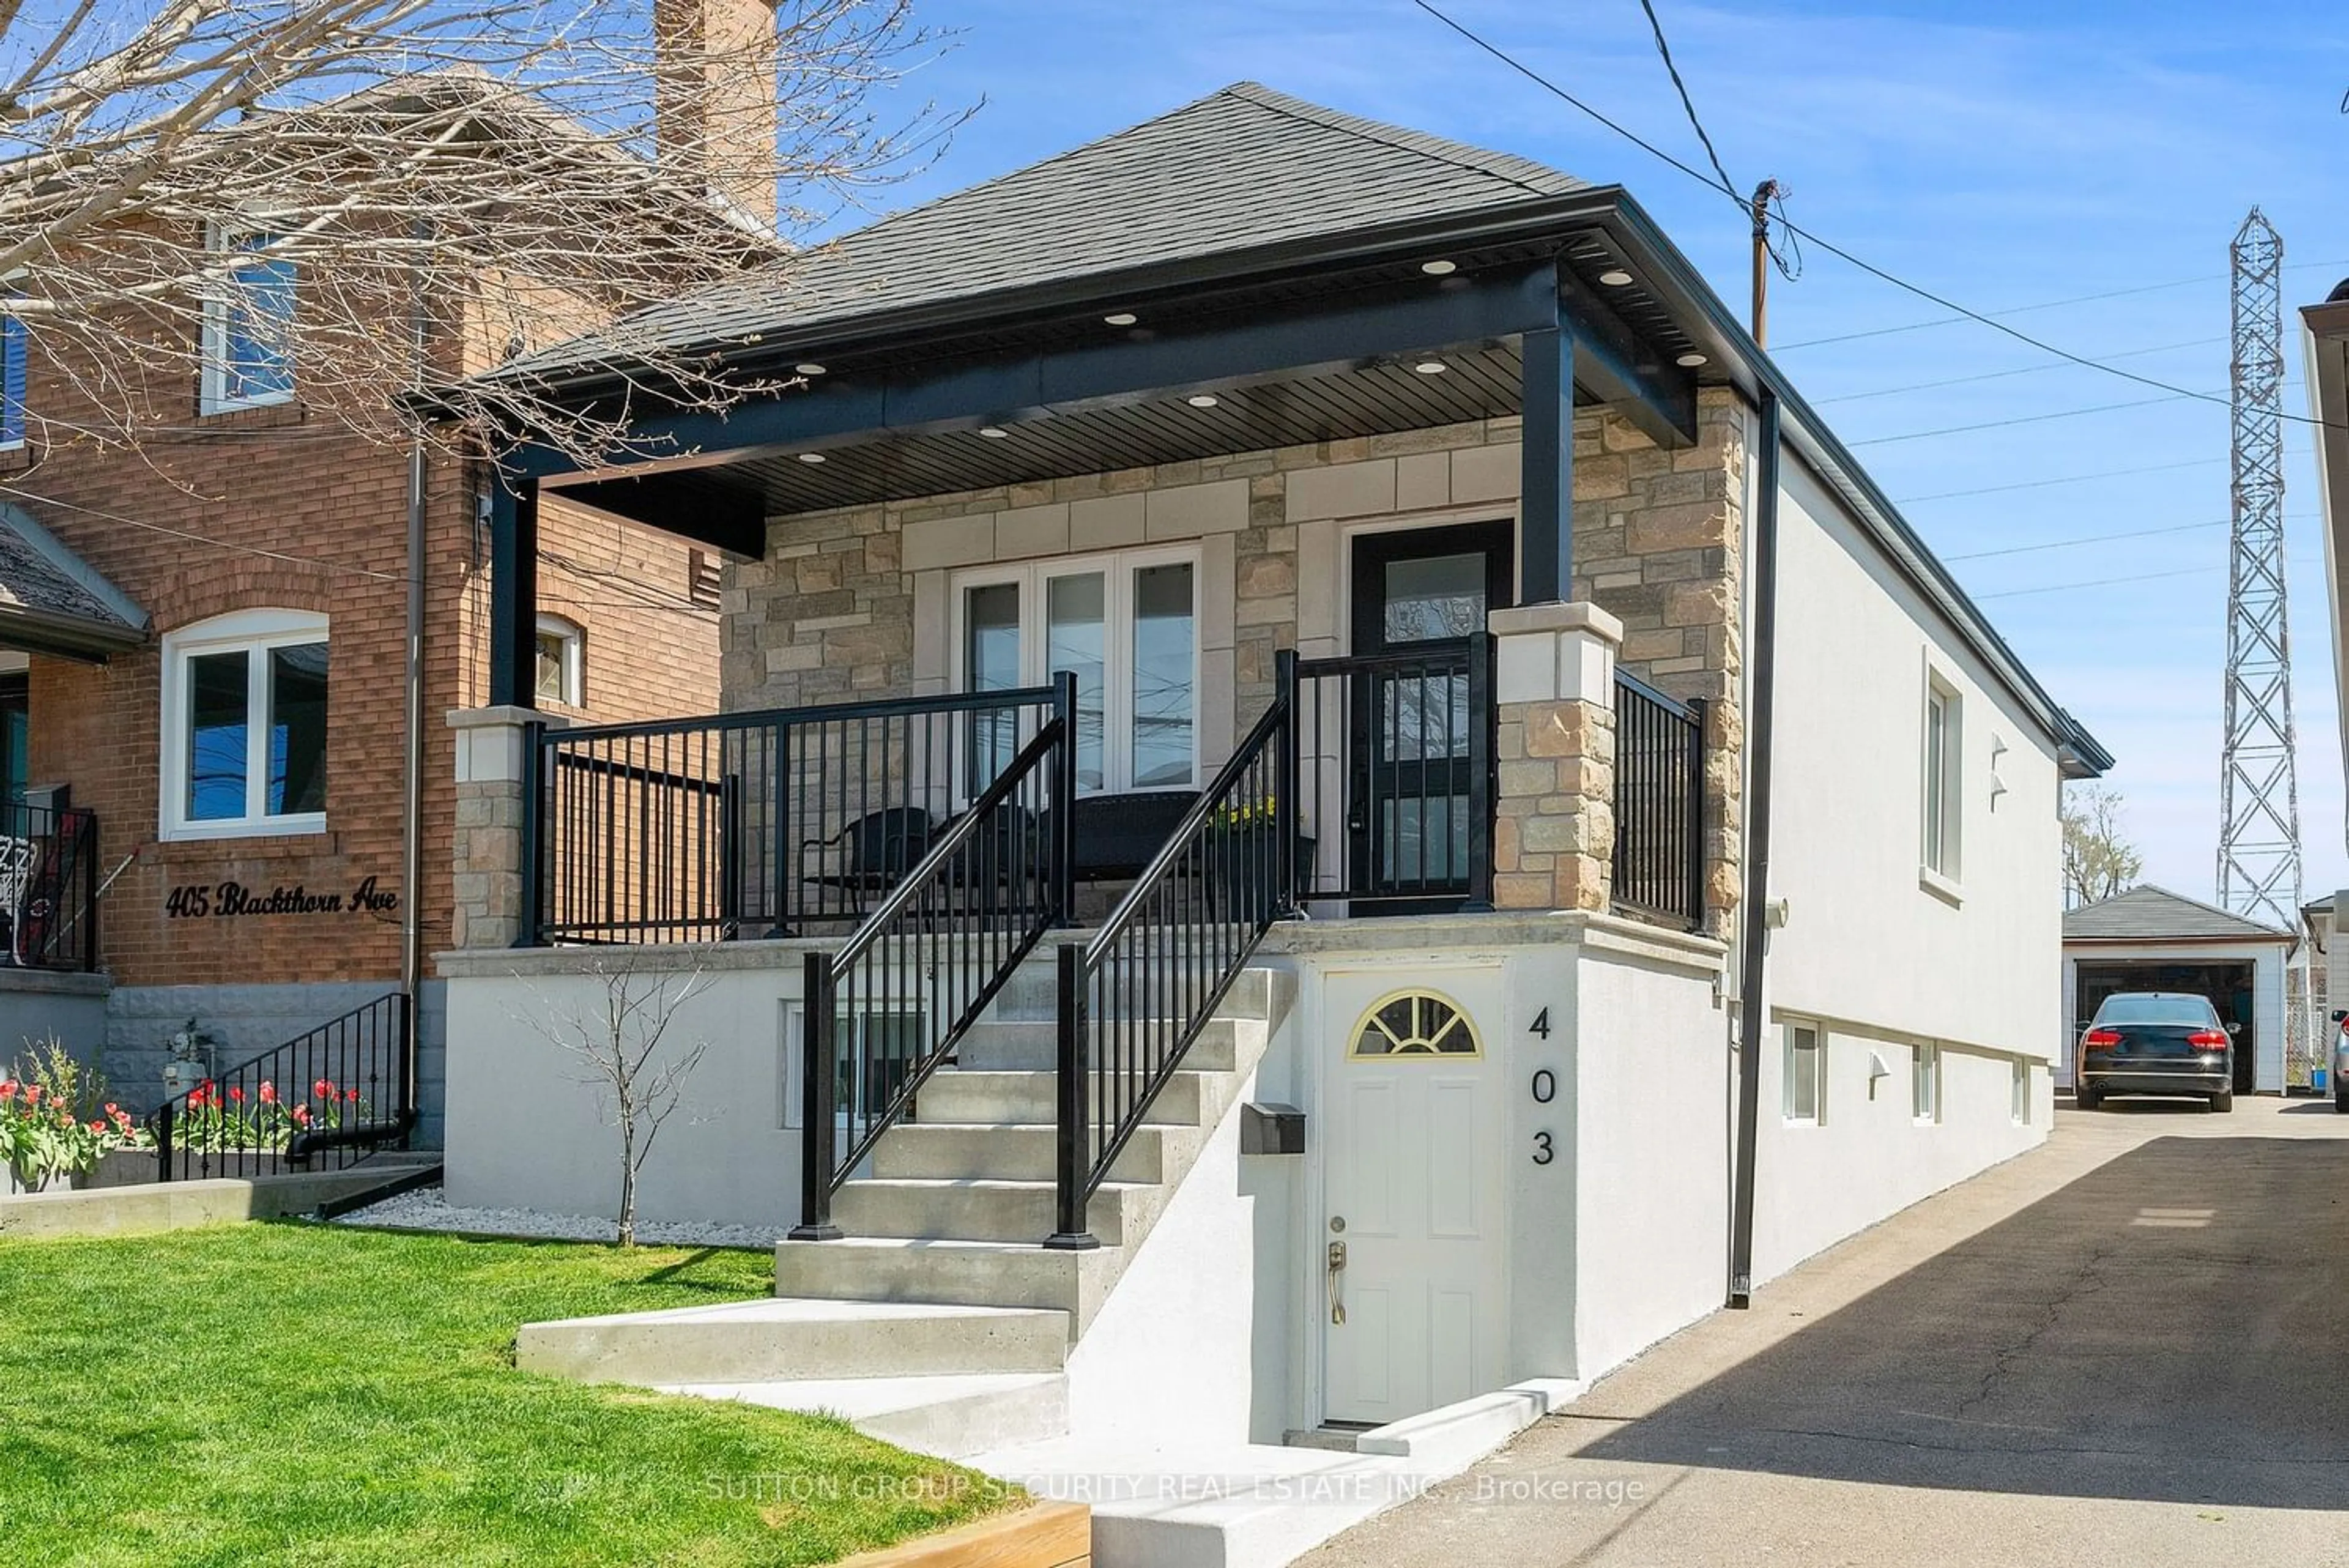 Frontside or backside of a home for 403 Blackthorn Ave, Toronto Ontario M6M 3C1